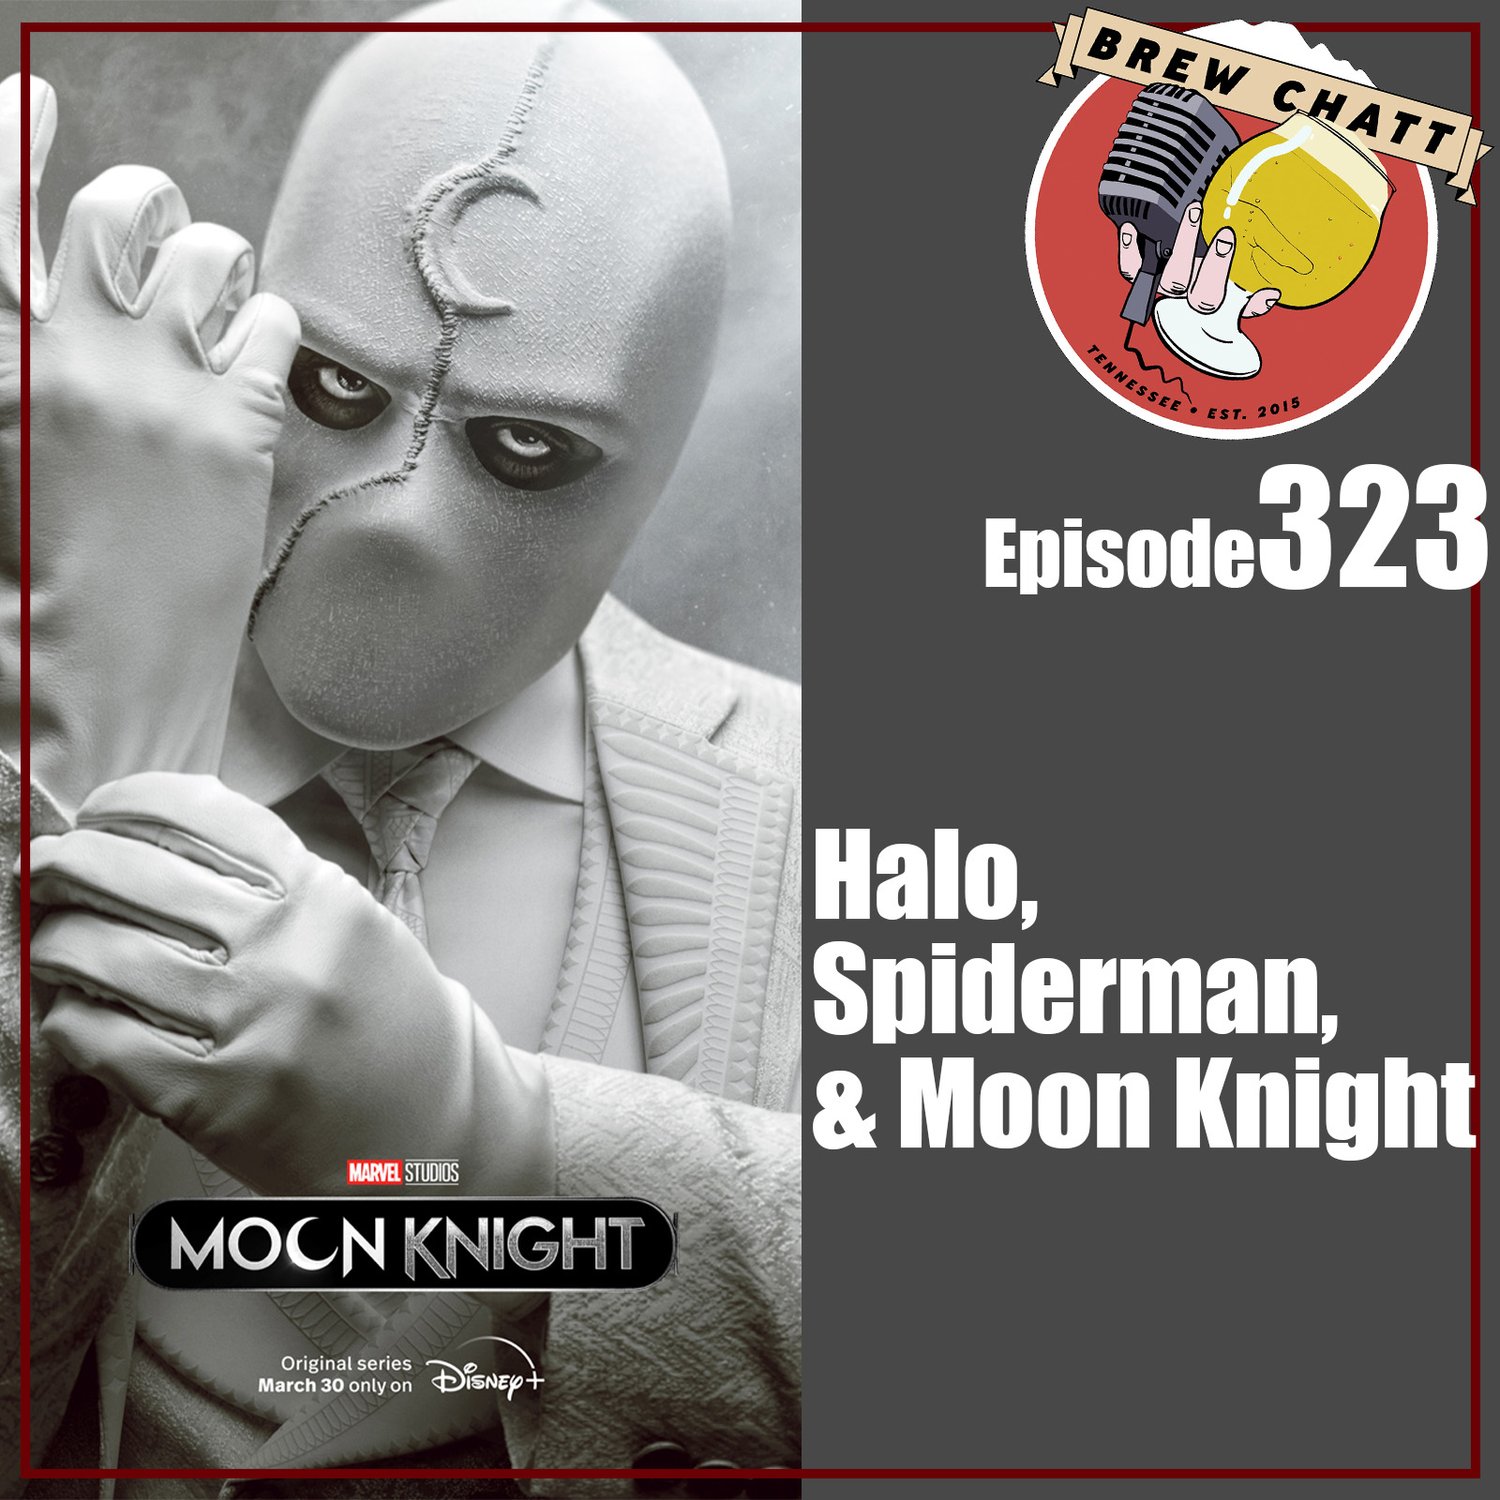 Episode 323 - Halo, Spiderman, and Moon Knight